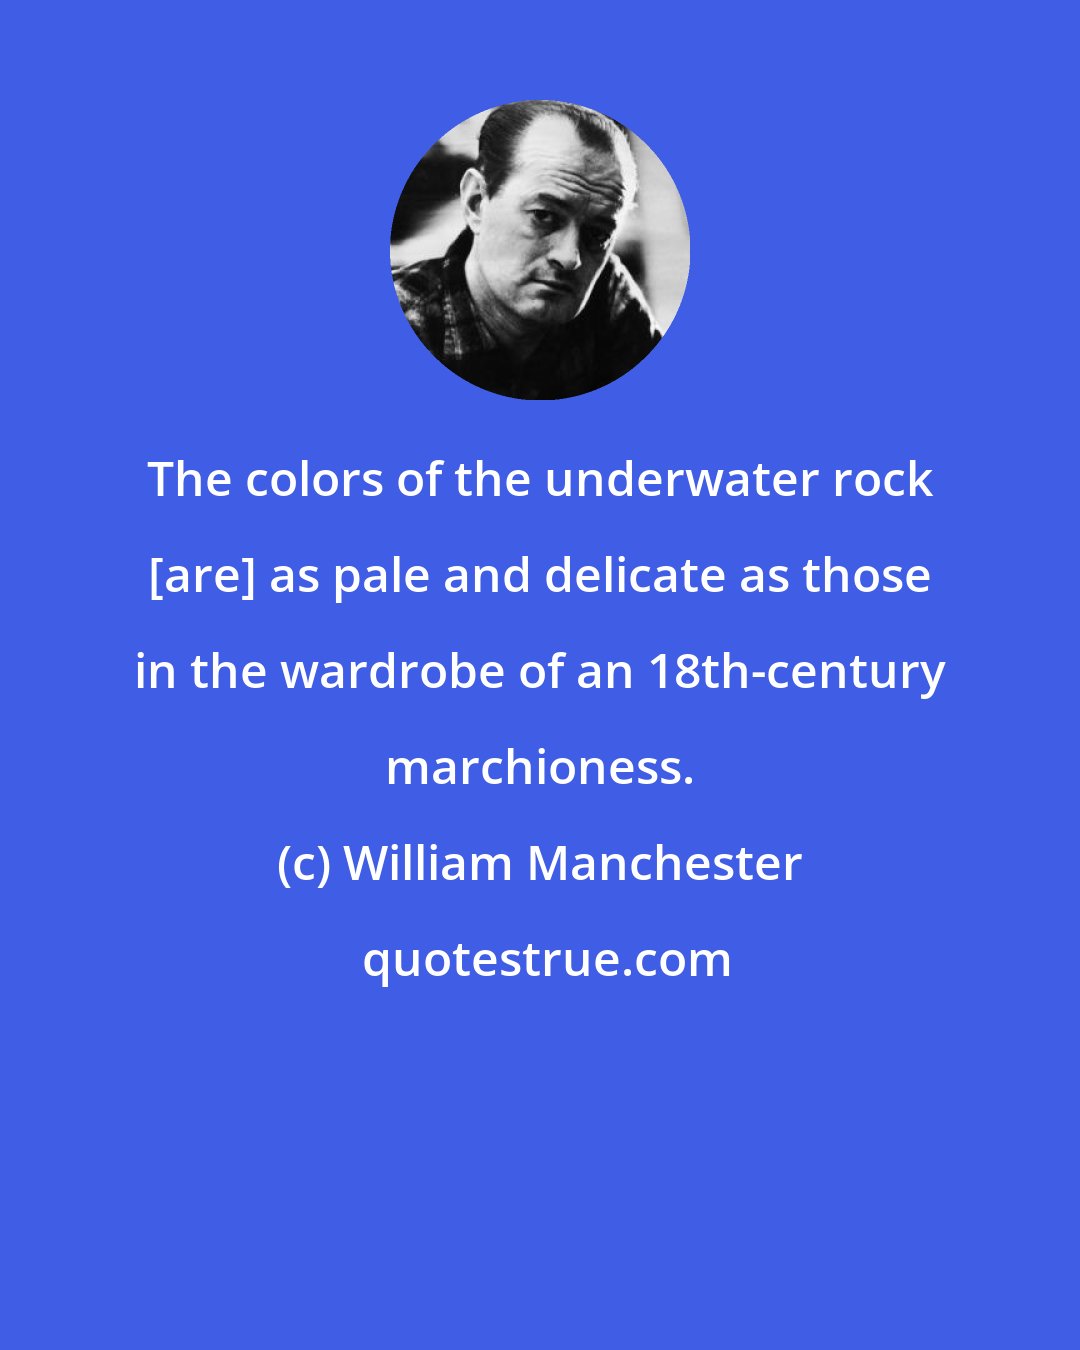 William Manchester: The colors of the underwater rock [are] as pale and delicate as those in the wardrobe of an 18th-century marchioness.